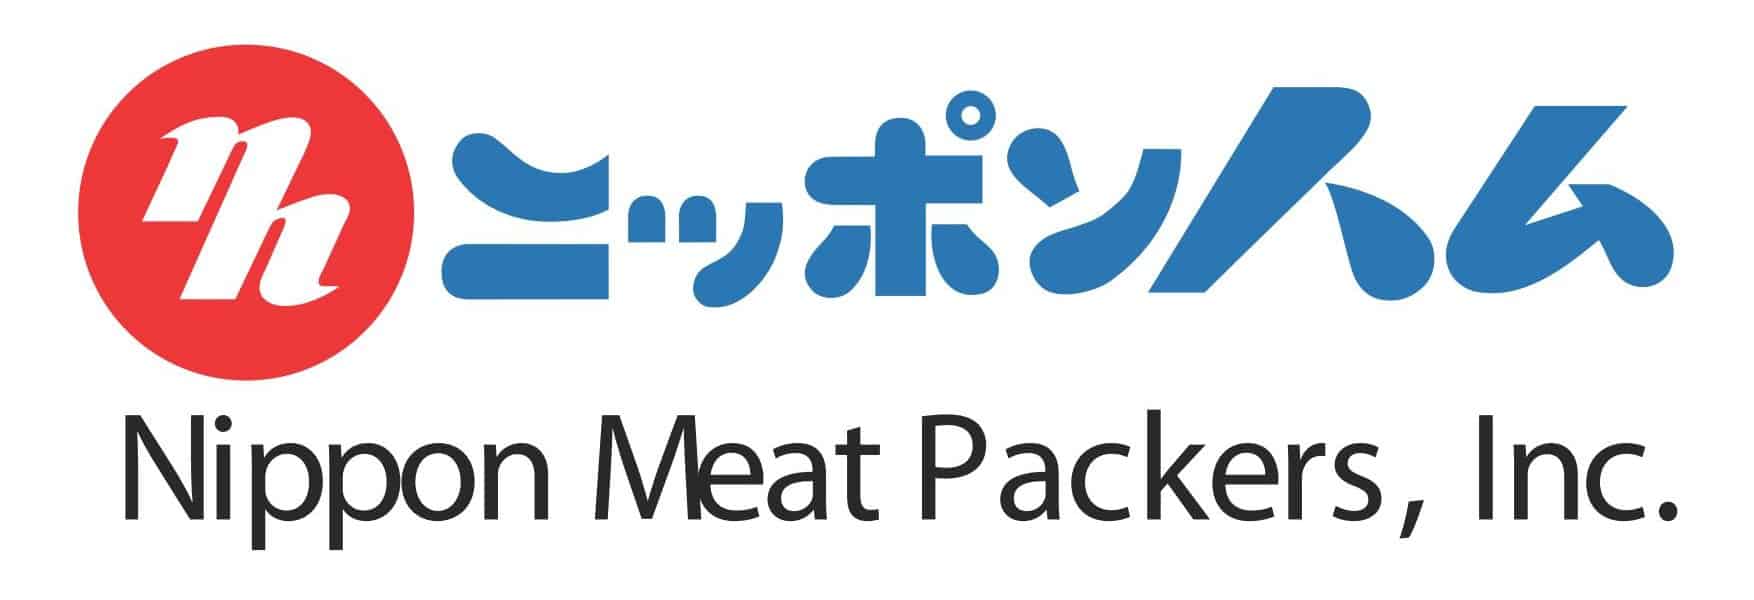 nippon meat packers logo